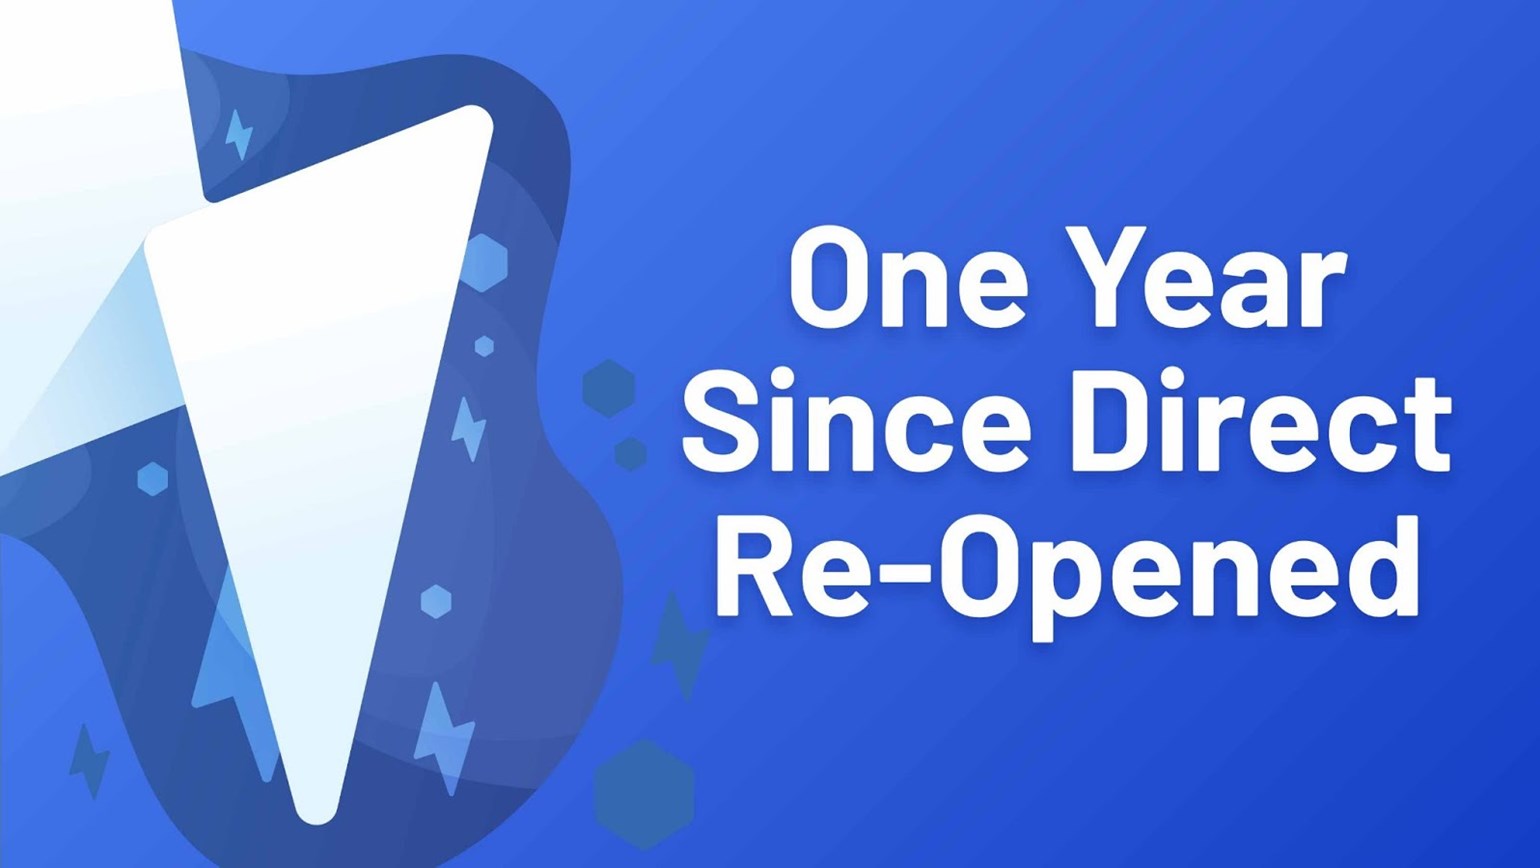 One Year Since Direct Re-Opened